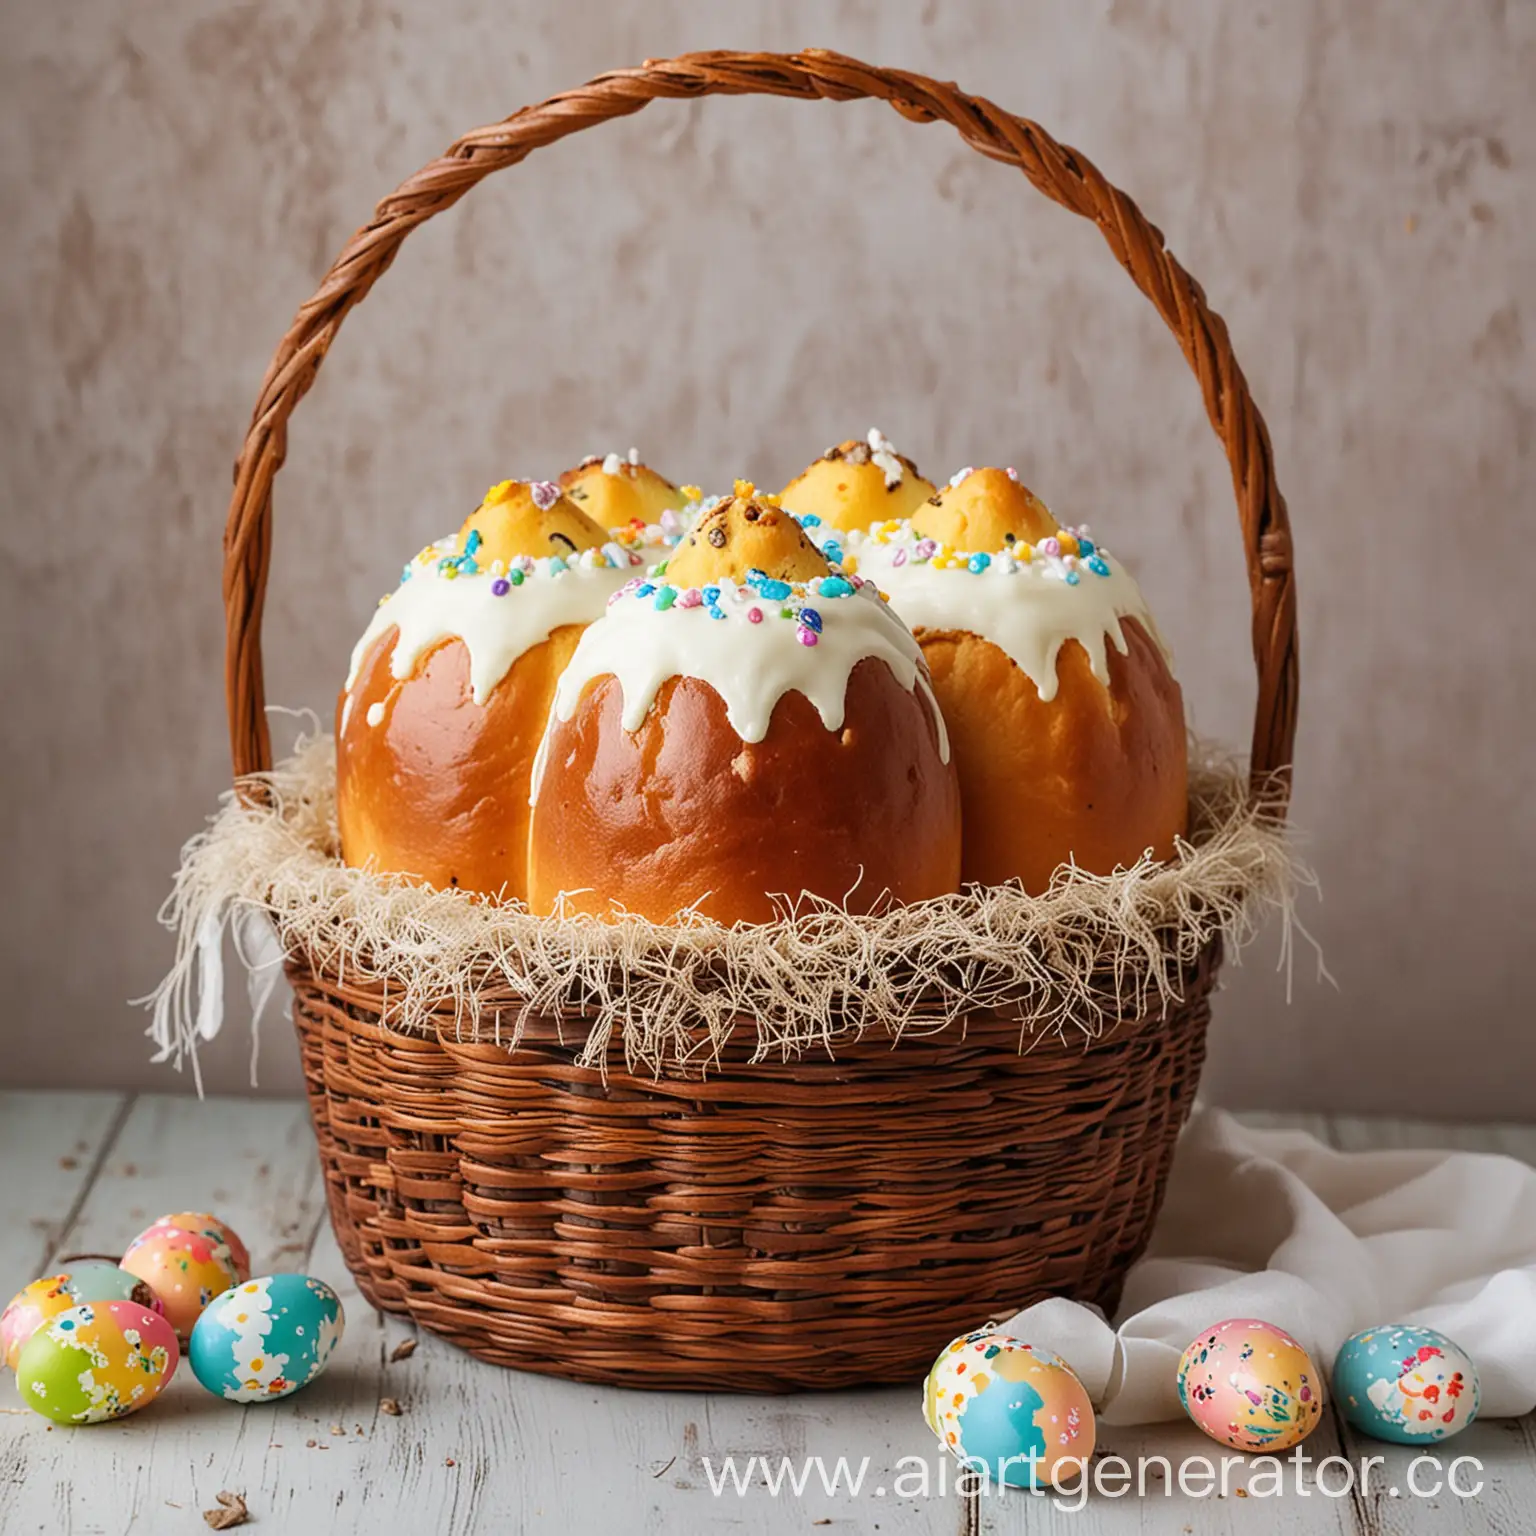 Traditional-Easter-Kulich-in-a-Decorative-Basket